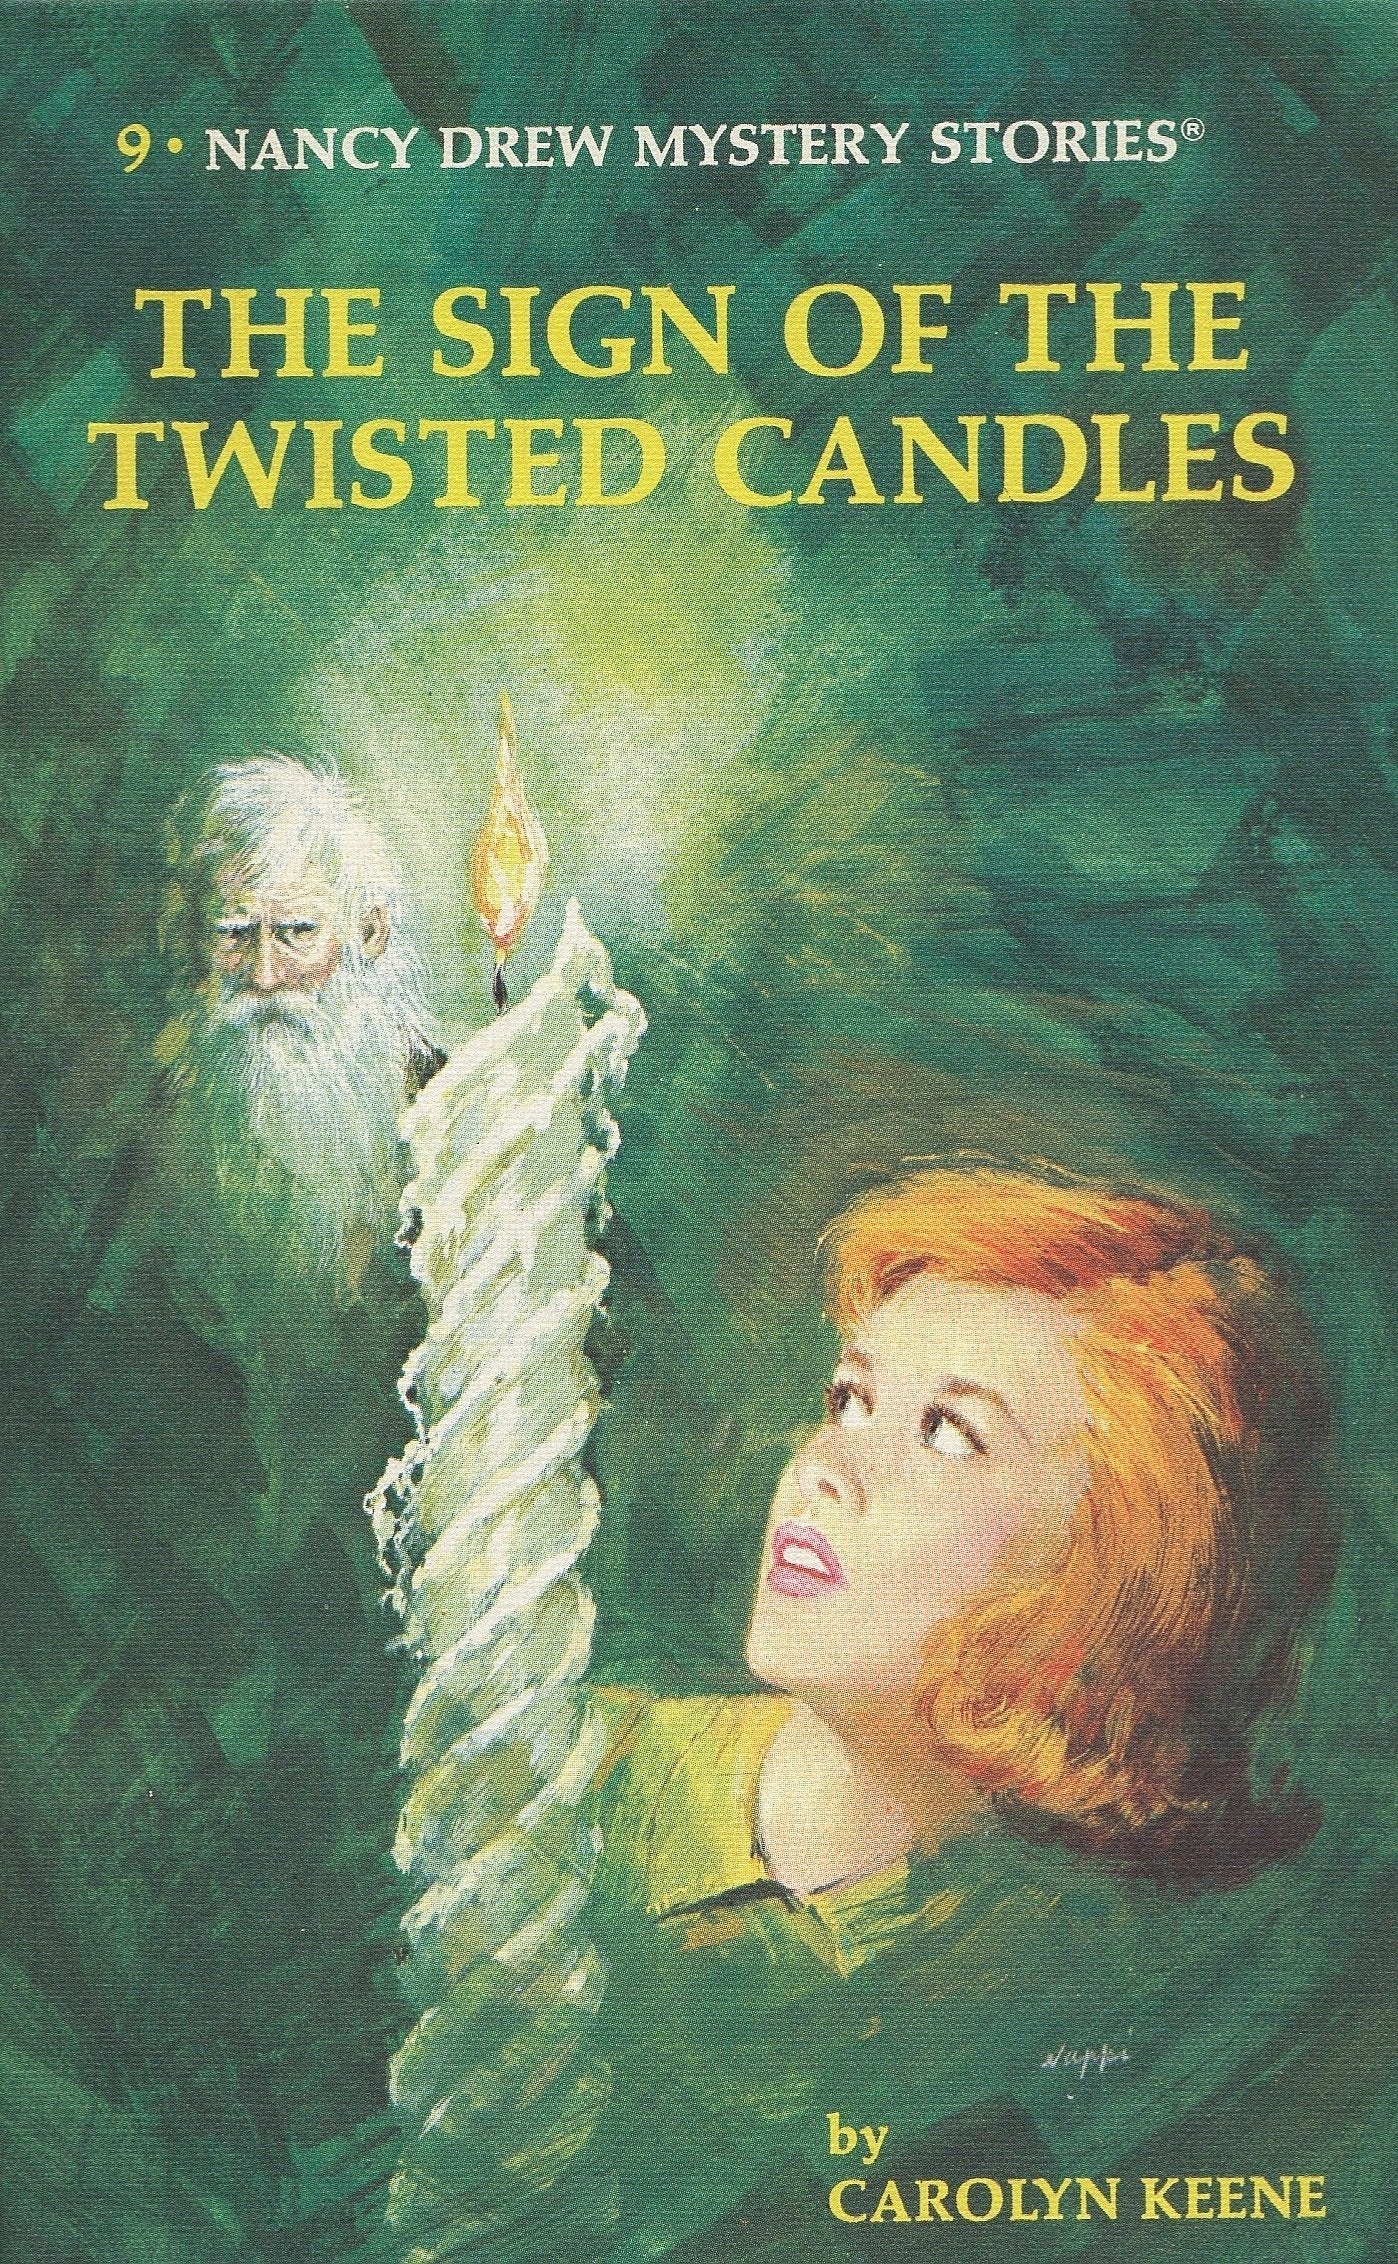 Nancy Drew Mystery Stories (9)- The sign of the twisted Candles